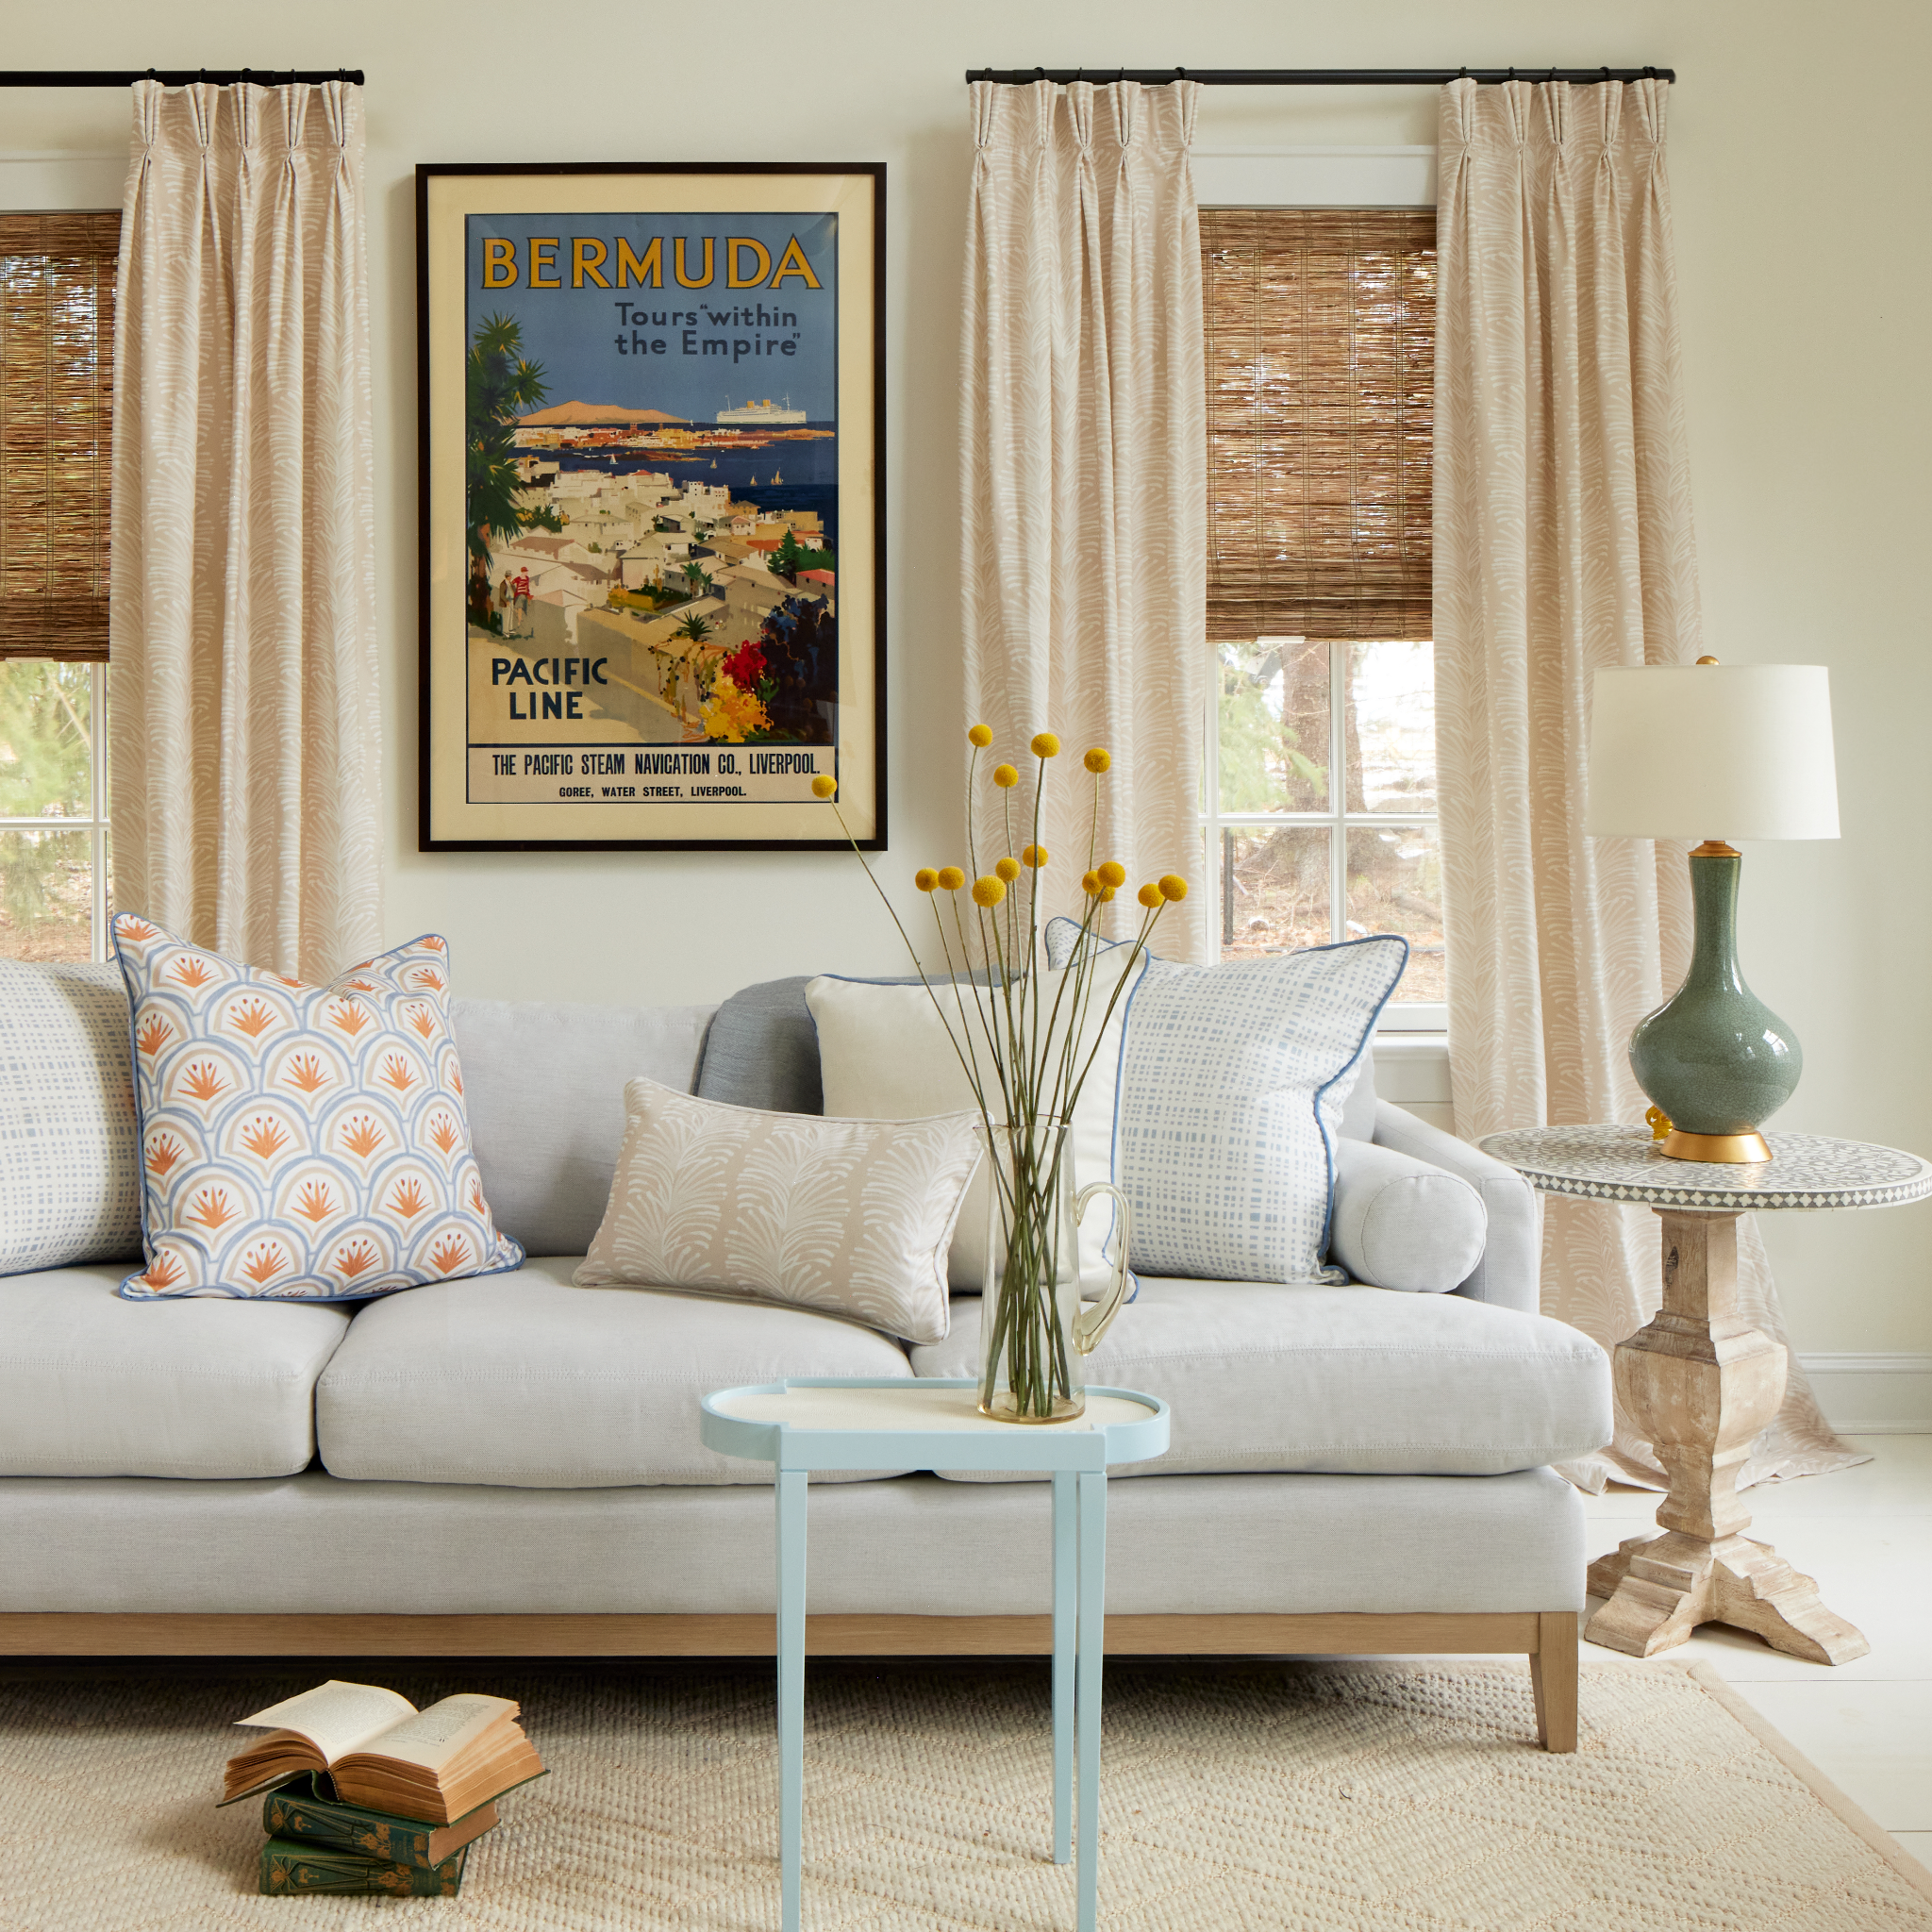 Living room styled with two sky blue gingham printed pillows, Art Deco Palm Pattern Printed Pillow, Beige Botanical Stripe Printed Lumbar, and Light brown Pillow on top of grey couch with Beige Botanical Stripe set of two curtains, books stacked on floor and blue and white circular table with yellow flowers in clear vase